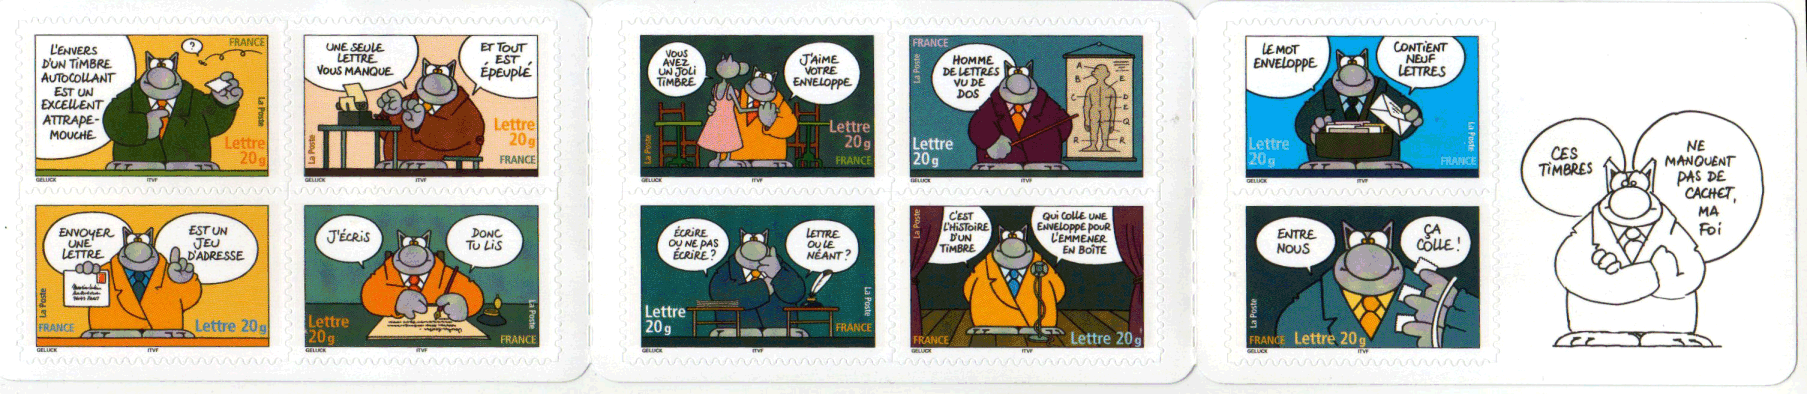 bloc%20timbres%20le%20chat%20geluck%20carnet.gif